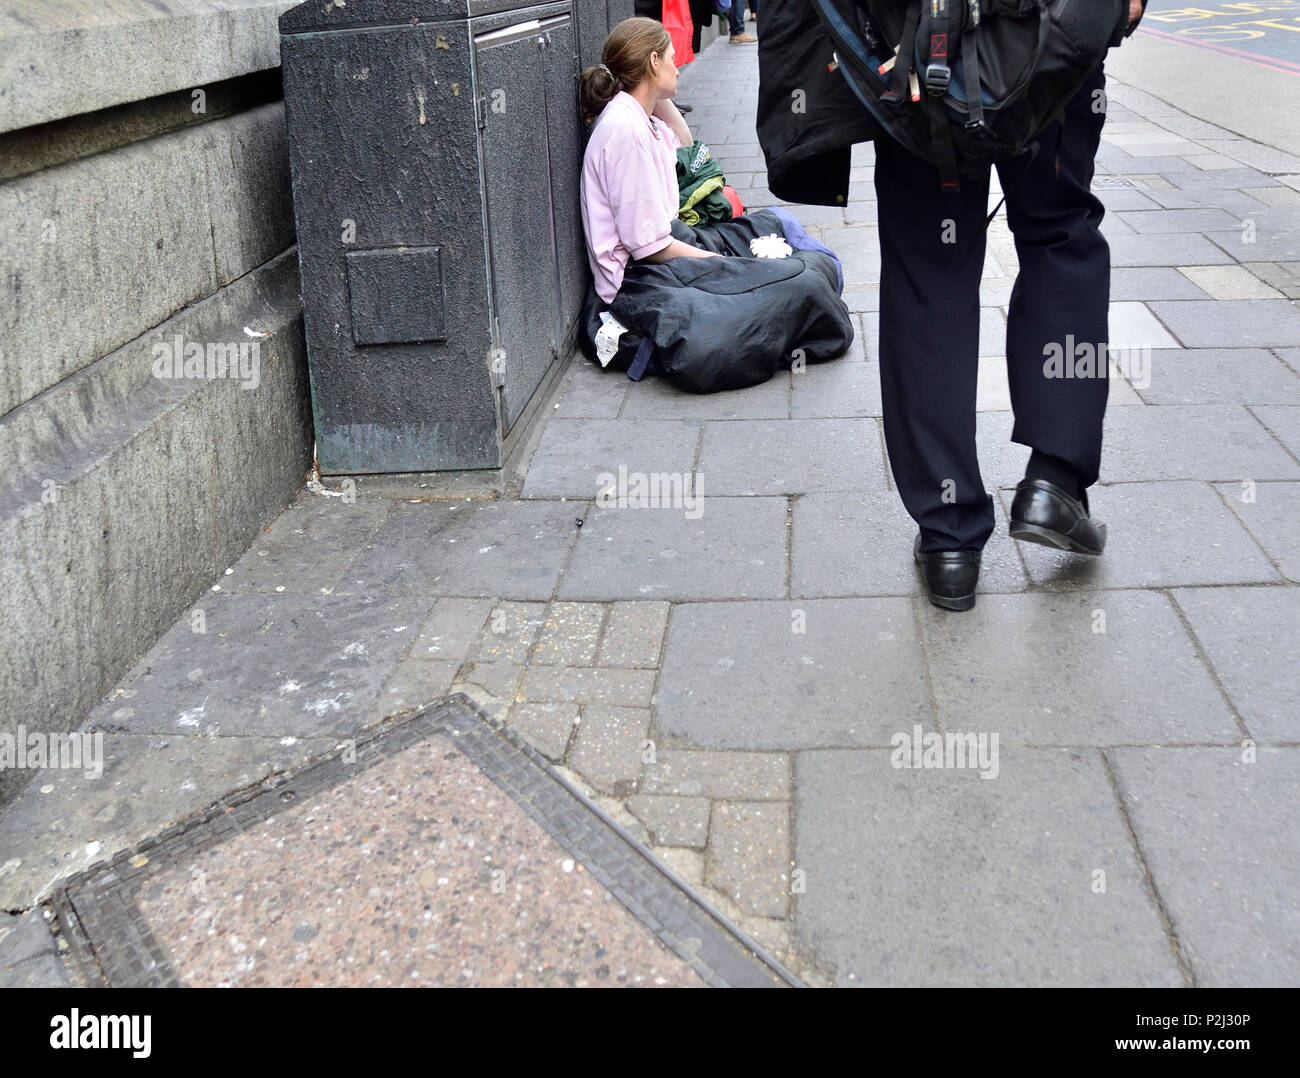 Homeless woman in central London, England, UK. Stock Photo